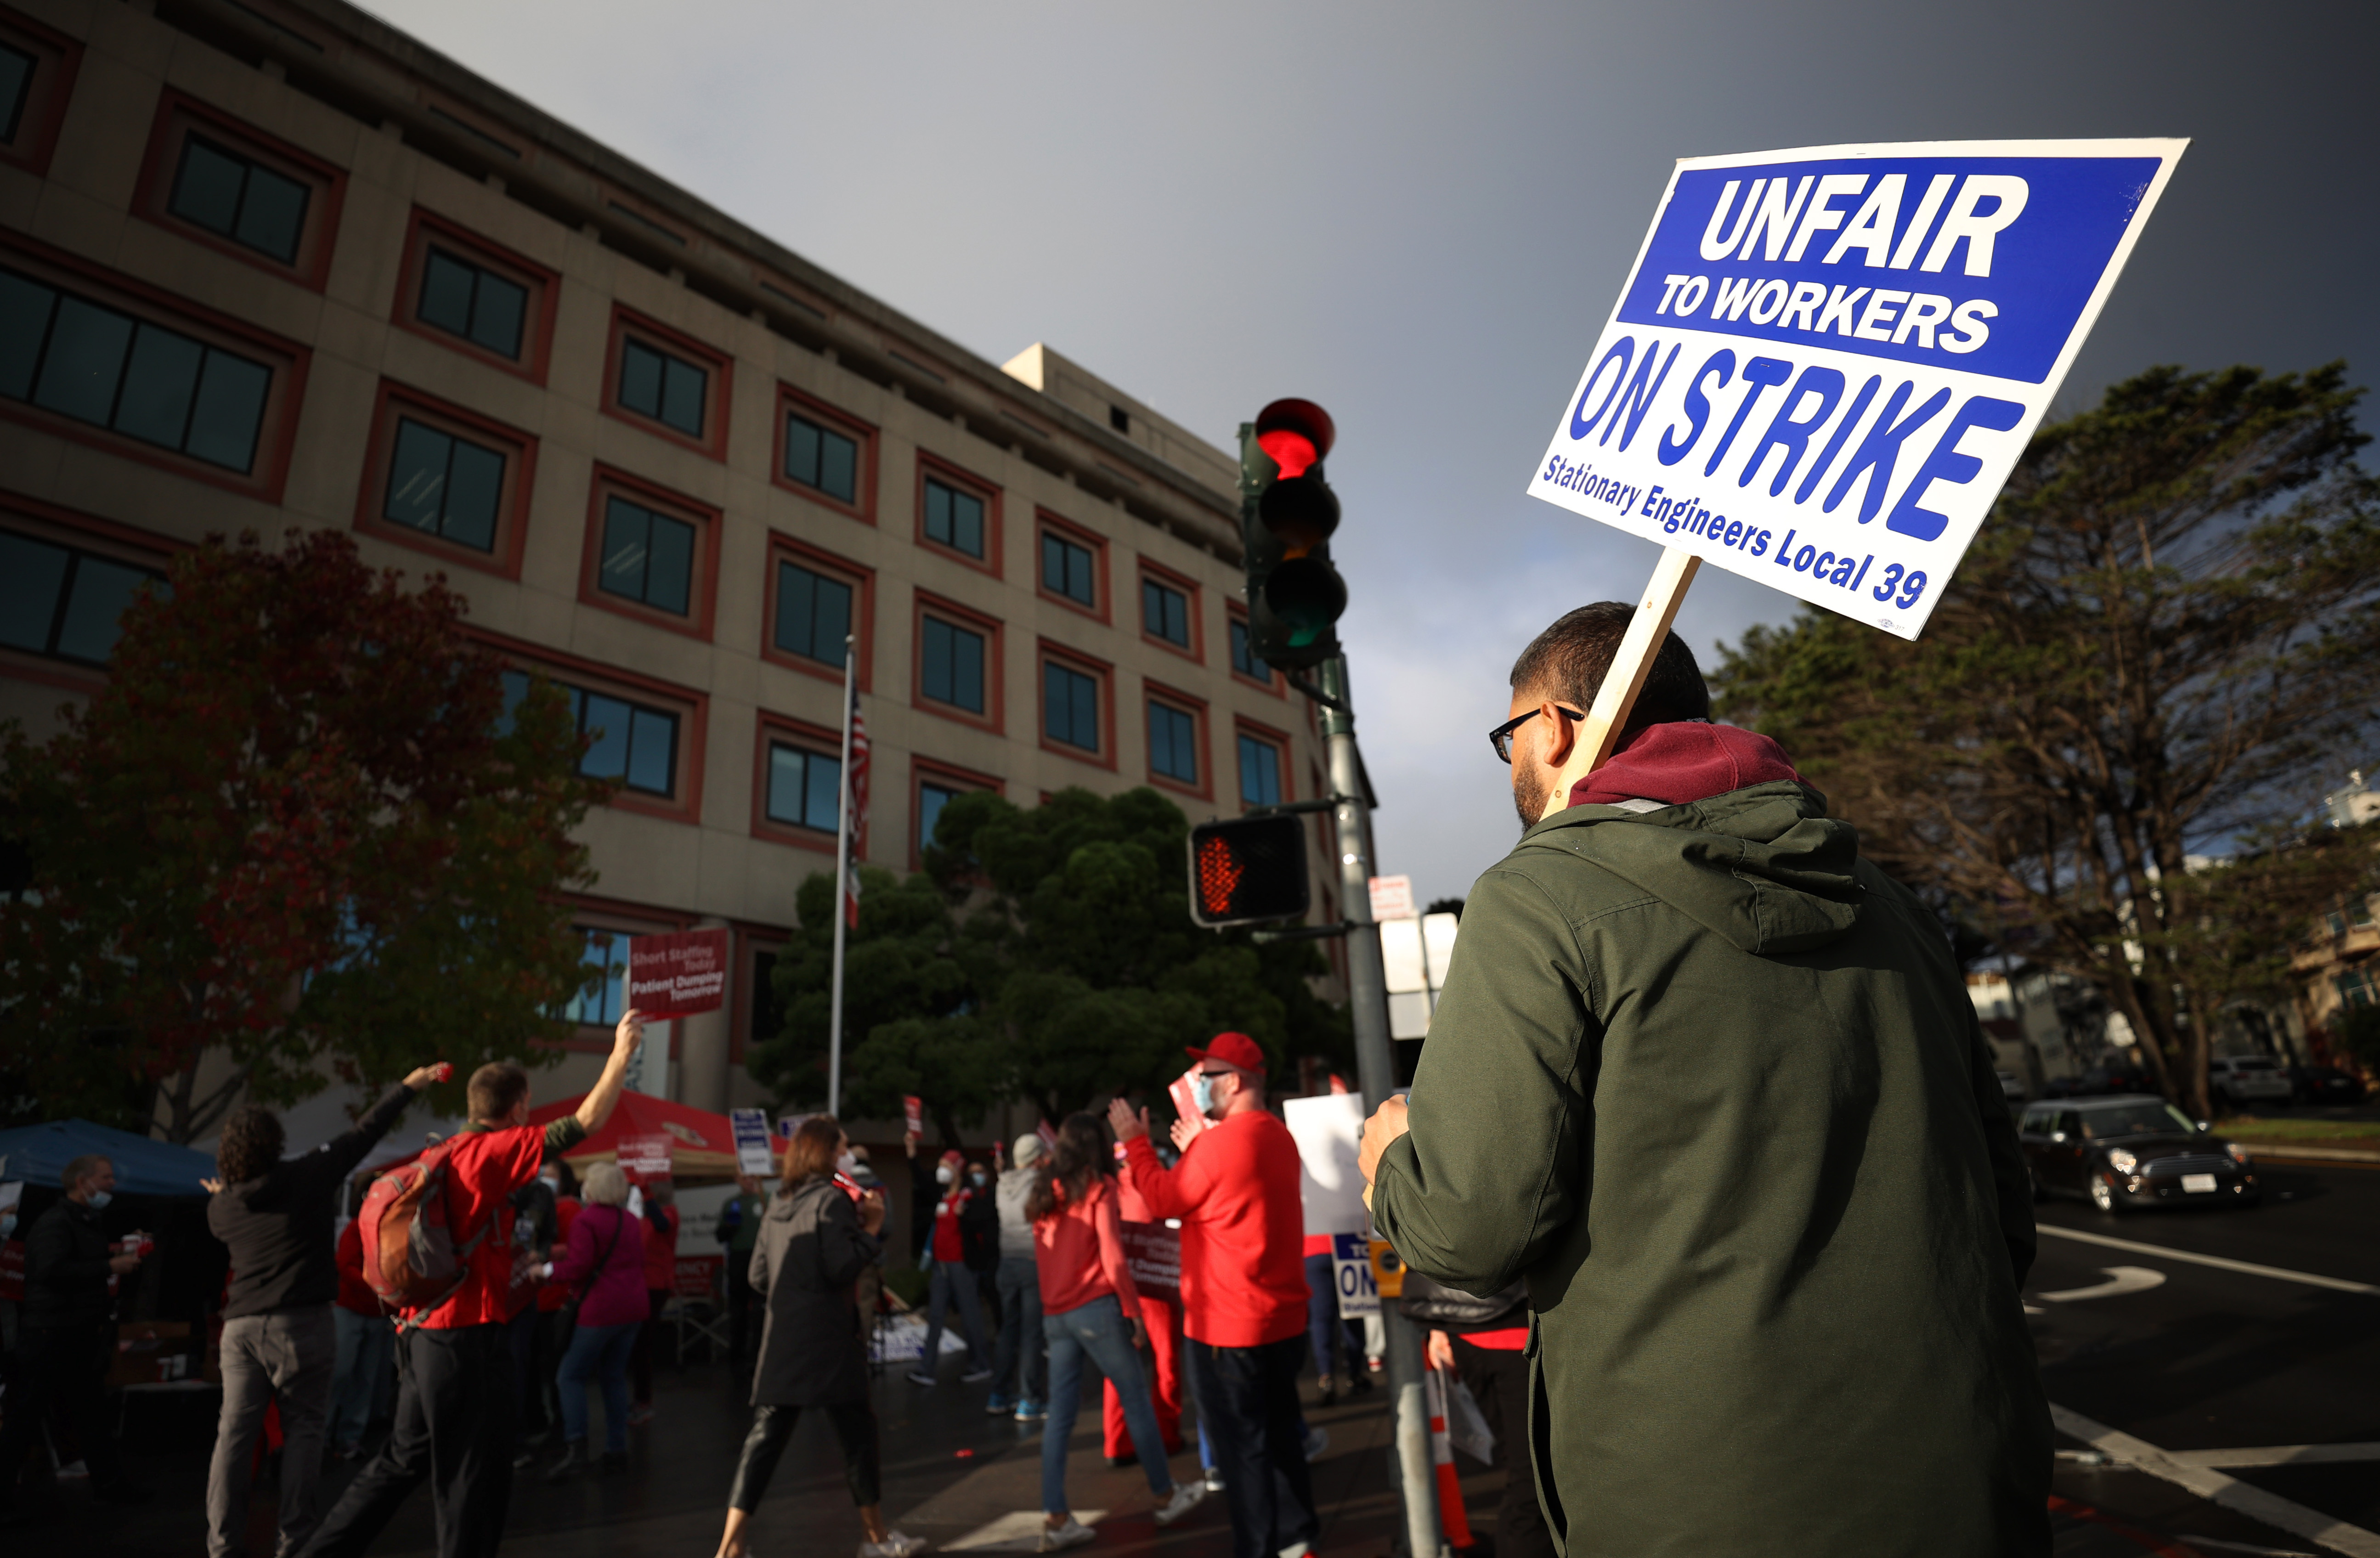 A picketer on a city street carries a sign that reads “Unfair to workers, on strike.”